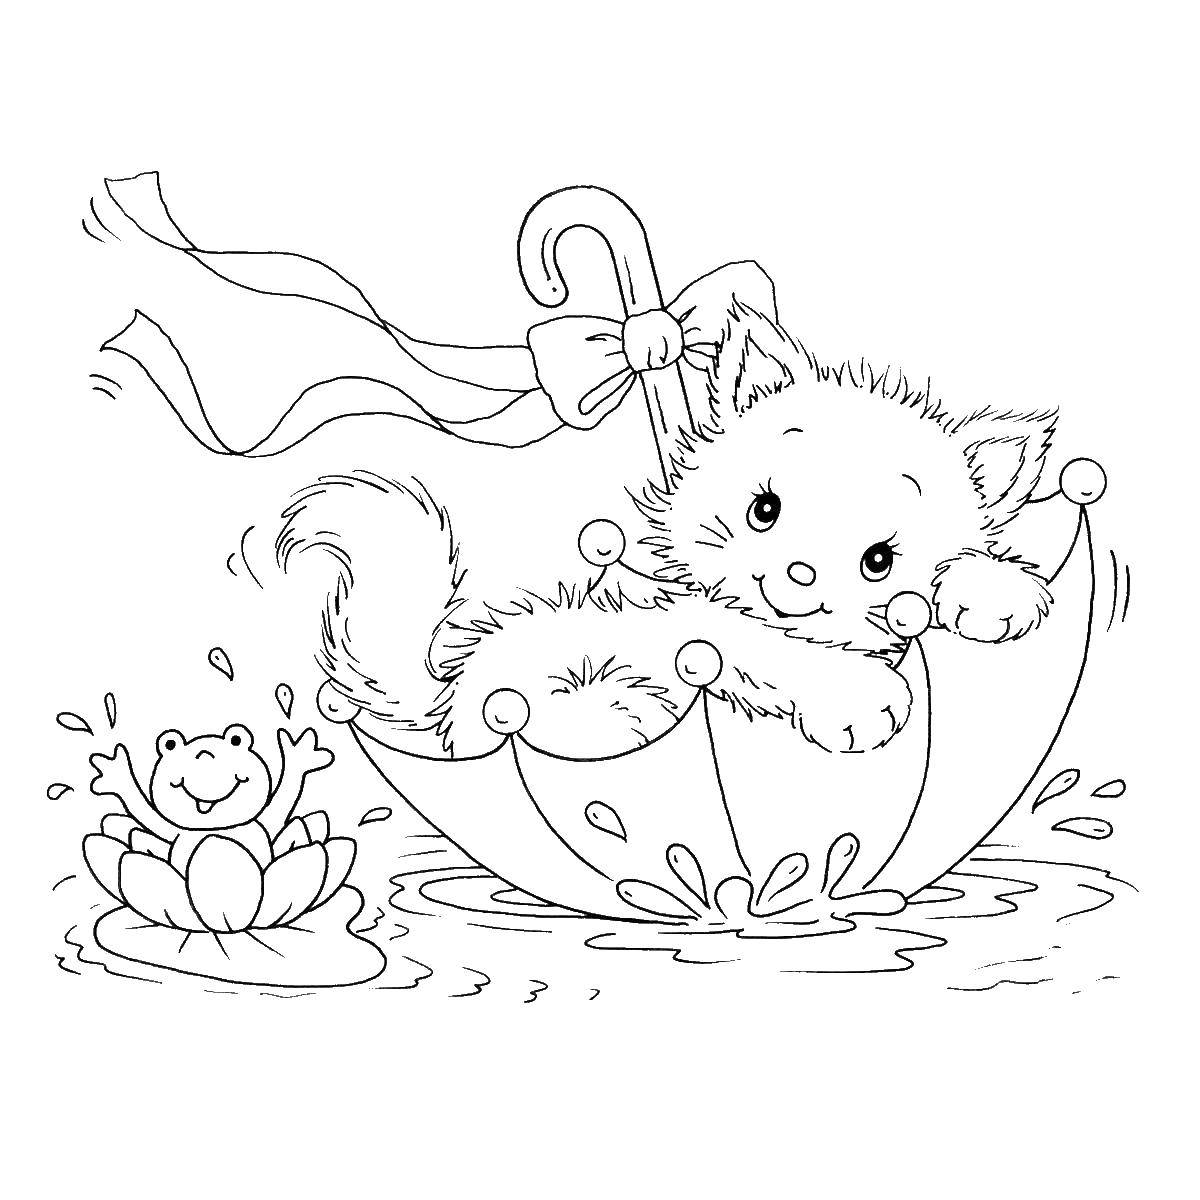 Coloring The kitten and the frog. Category Animals. Tags:  animals, cat, frog.